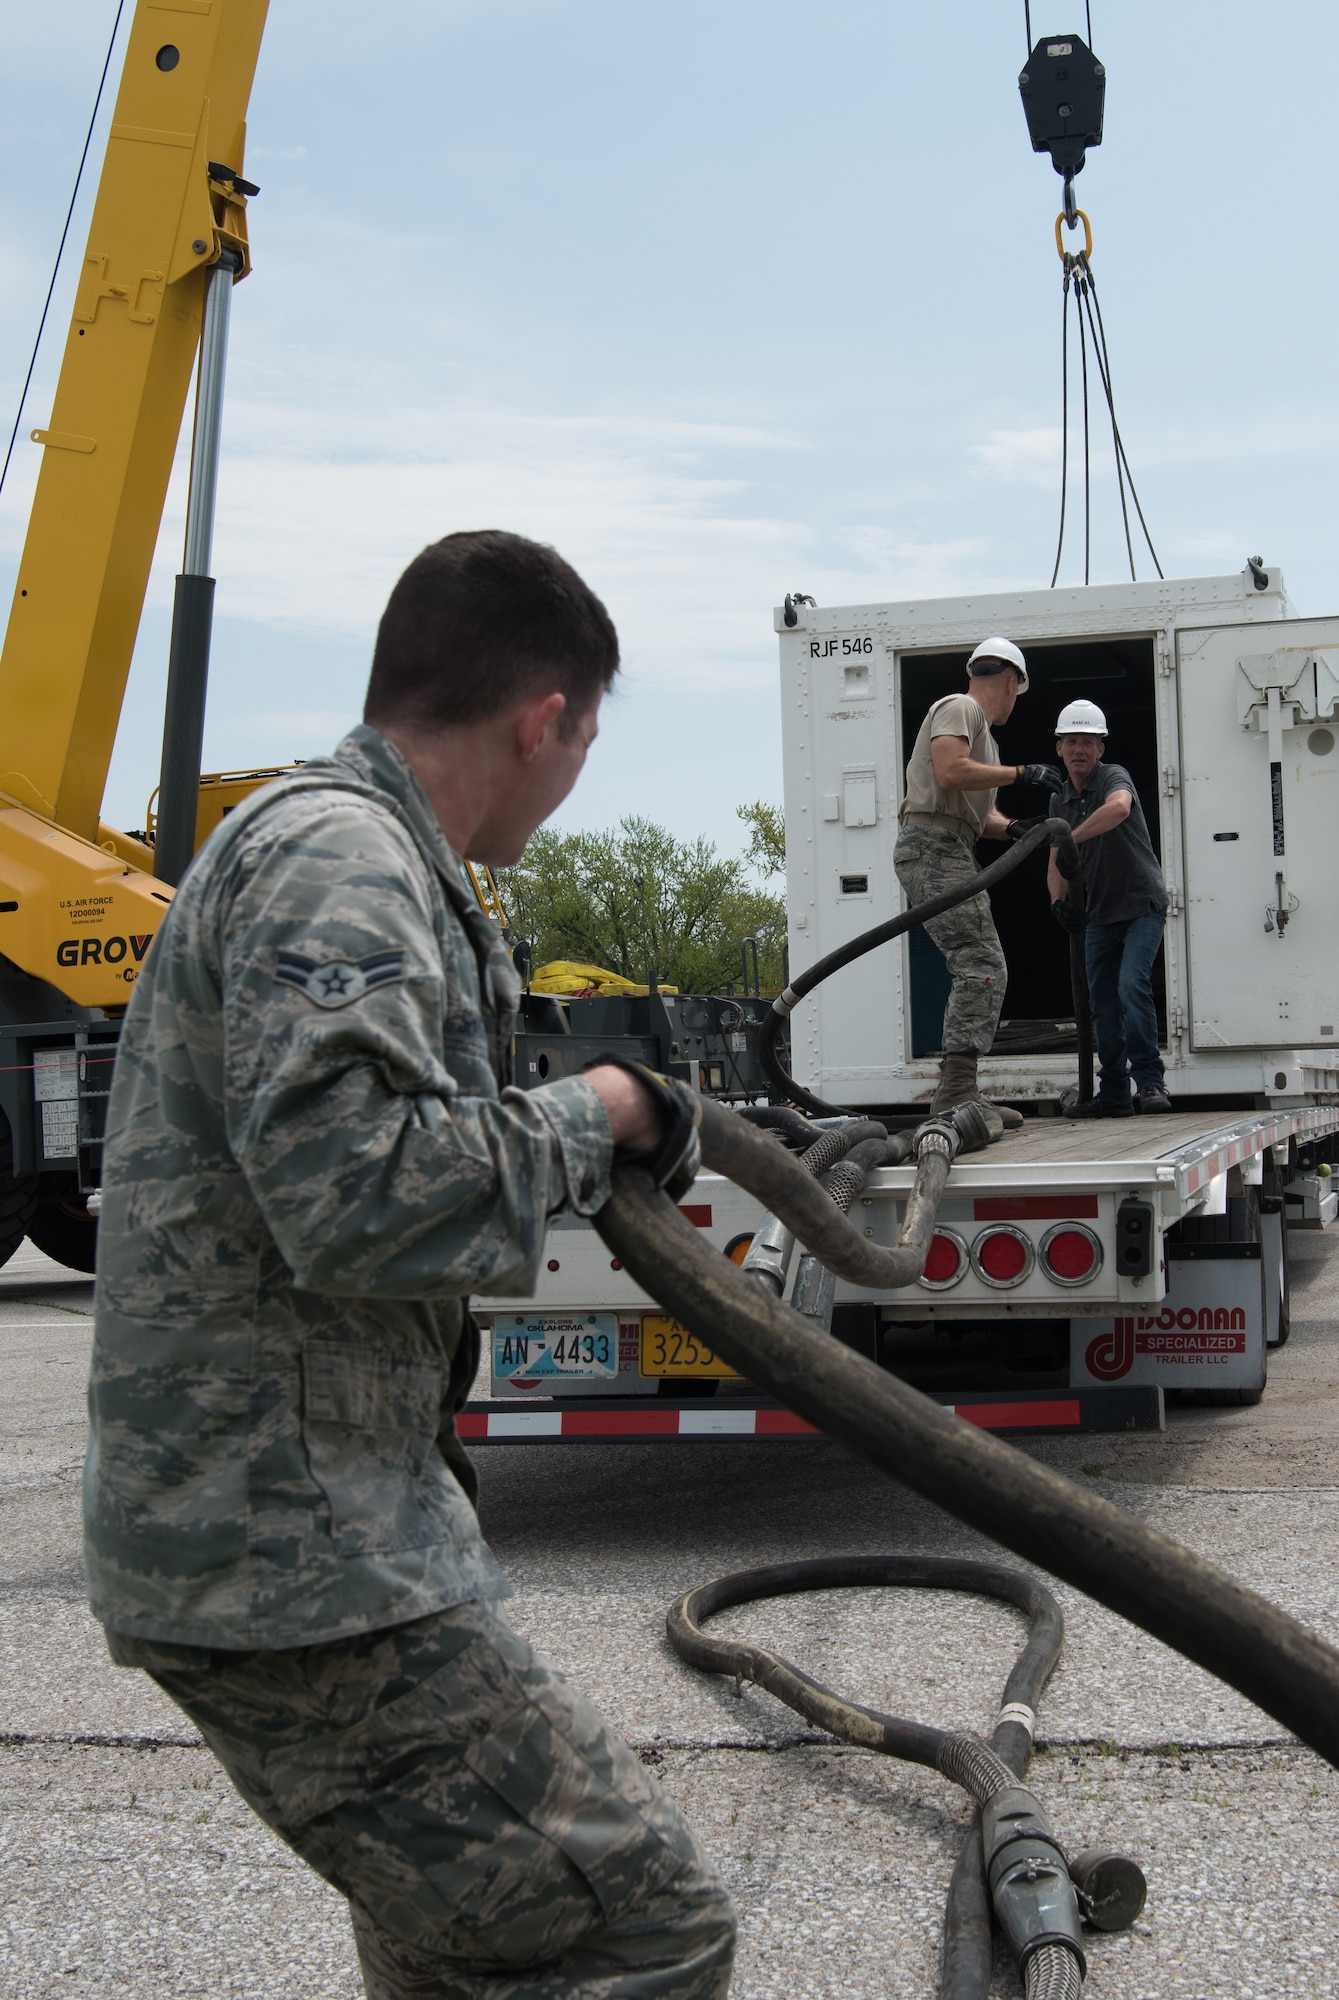 Airmen assigned to the 4th Component Maintenance Squadron at Seymour Johnson Air Force Base, North Carolina, unload power cables for the Rapid Assistance Support for Calibration unit May 6, 2019, at Offutt Air Force Base, Nebraska. PMEL is responsible for calibrating electronic, mechanical and physical dimensional test equipment in order to meet laboratory standards that are traceable to the National Institute of Standards. (U.S. Air Force photo by L. Cunningham)